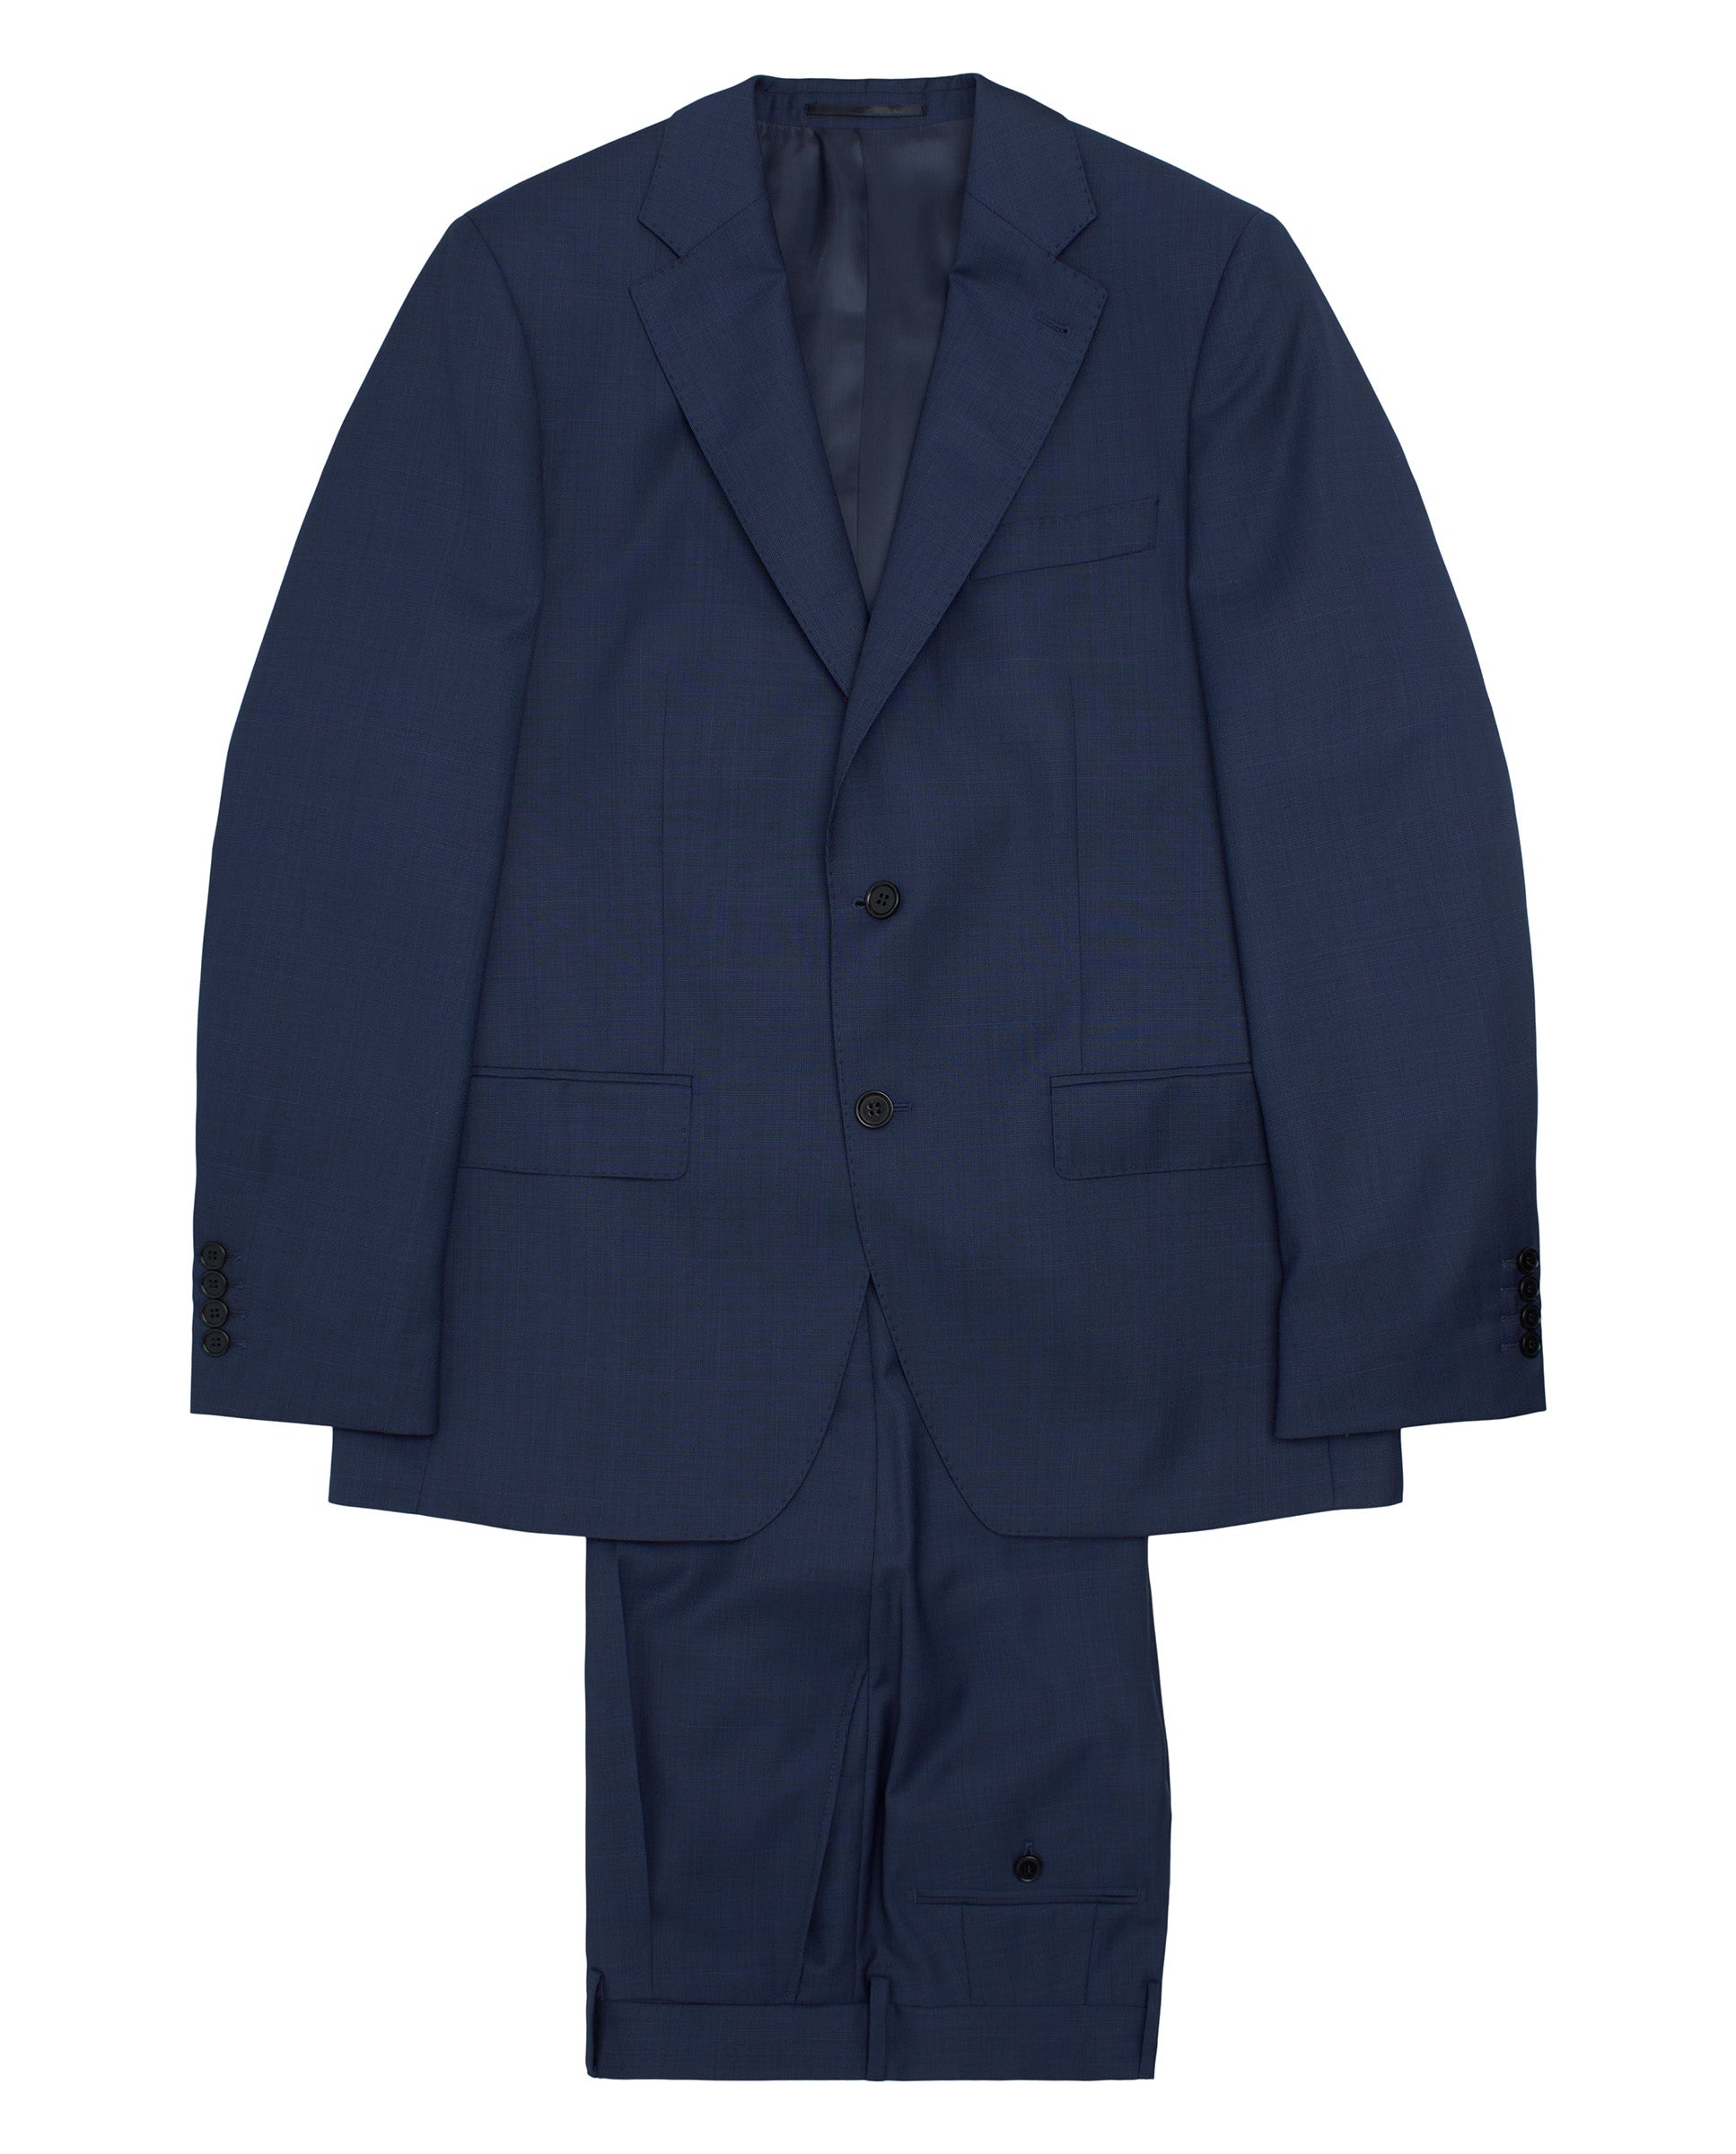 Navy blue wool Glen plaid suit by MIRTO